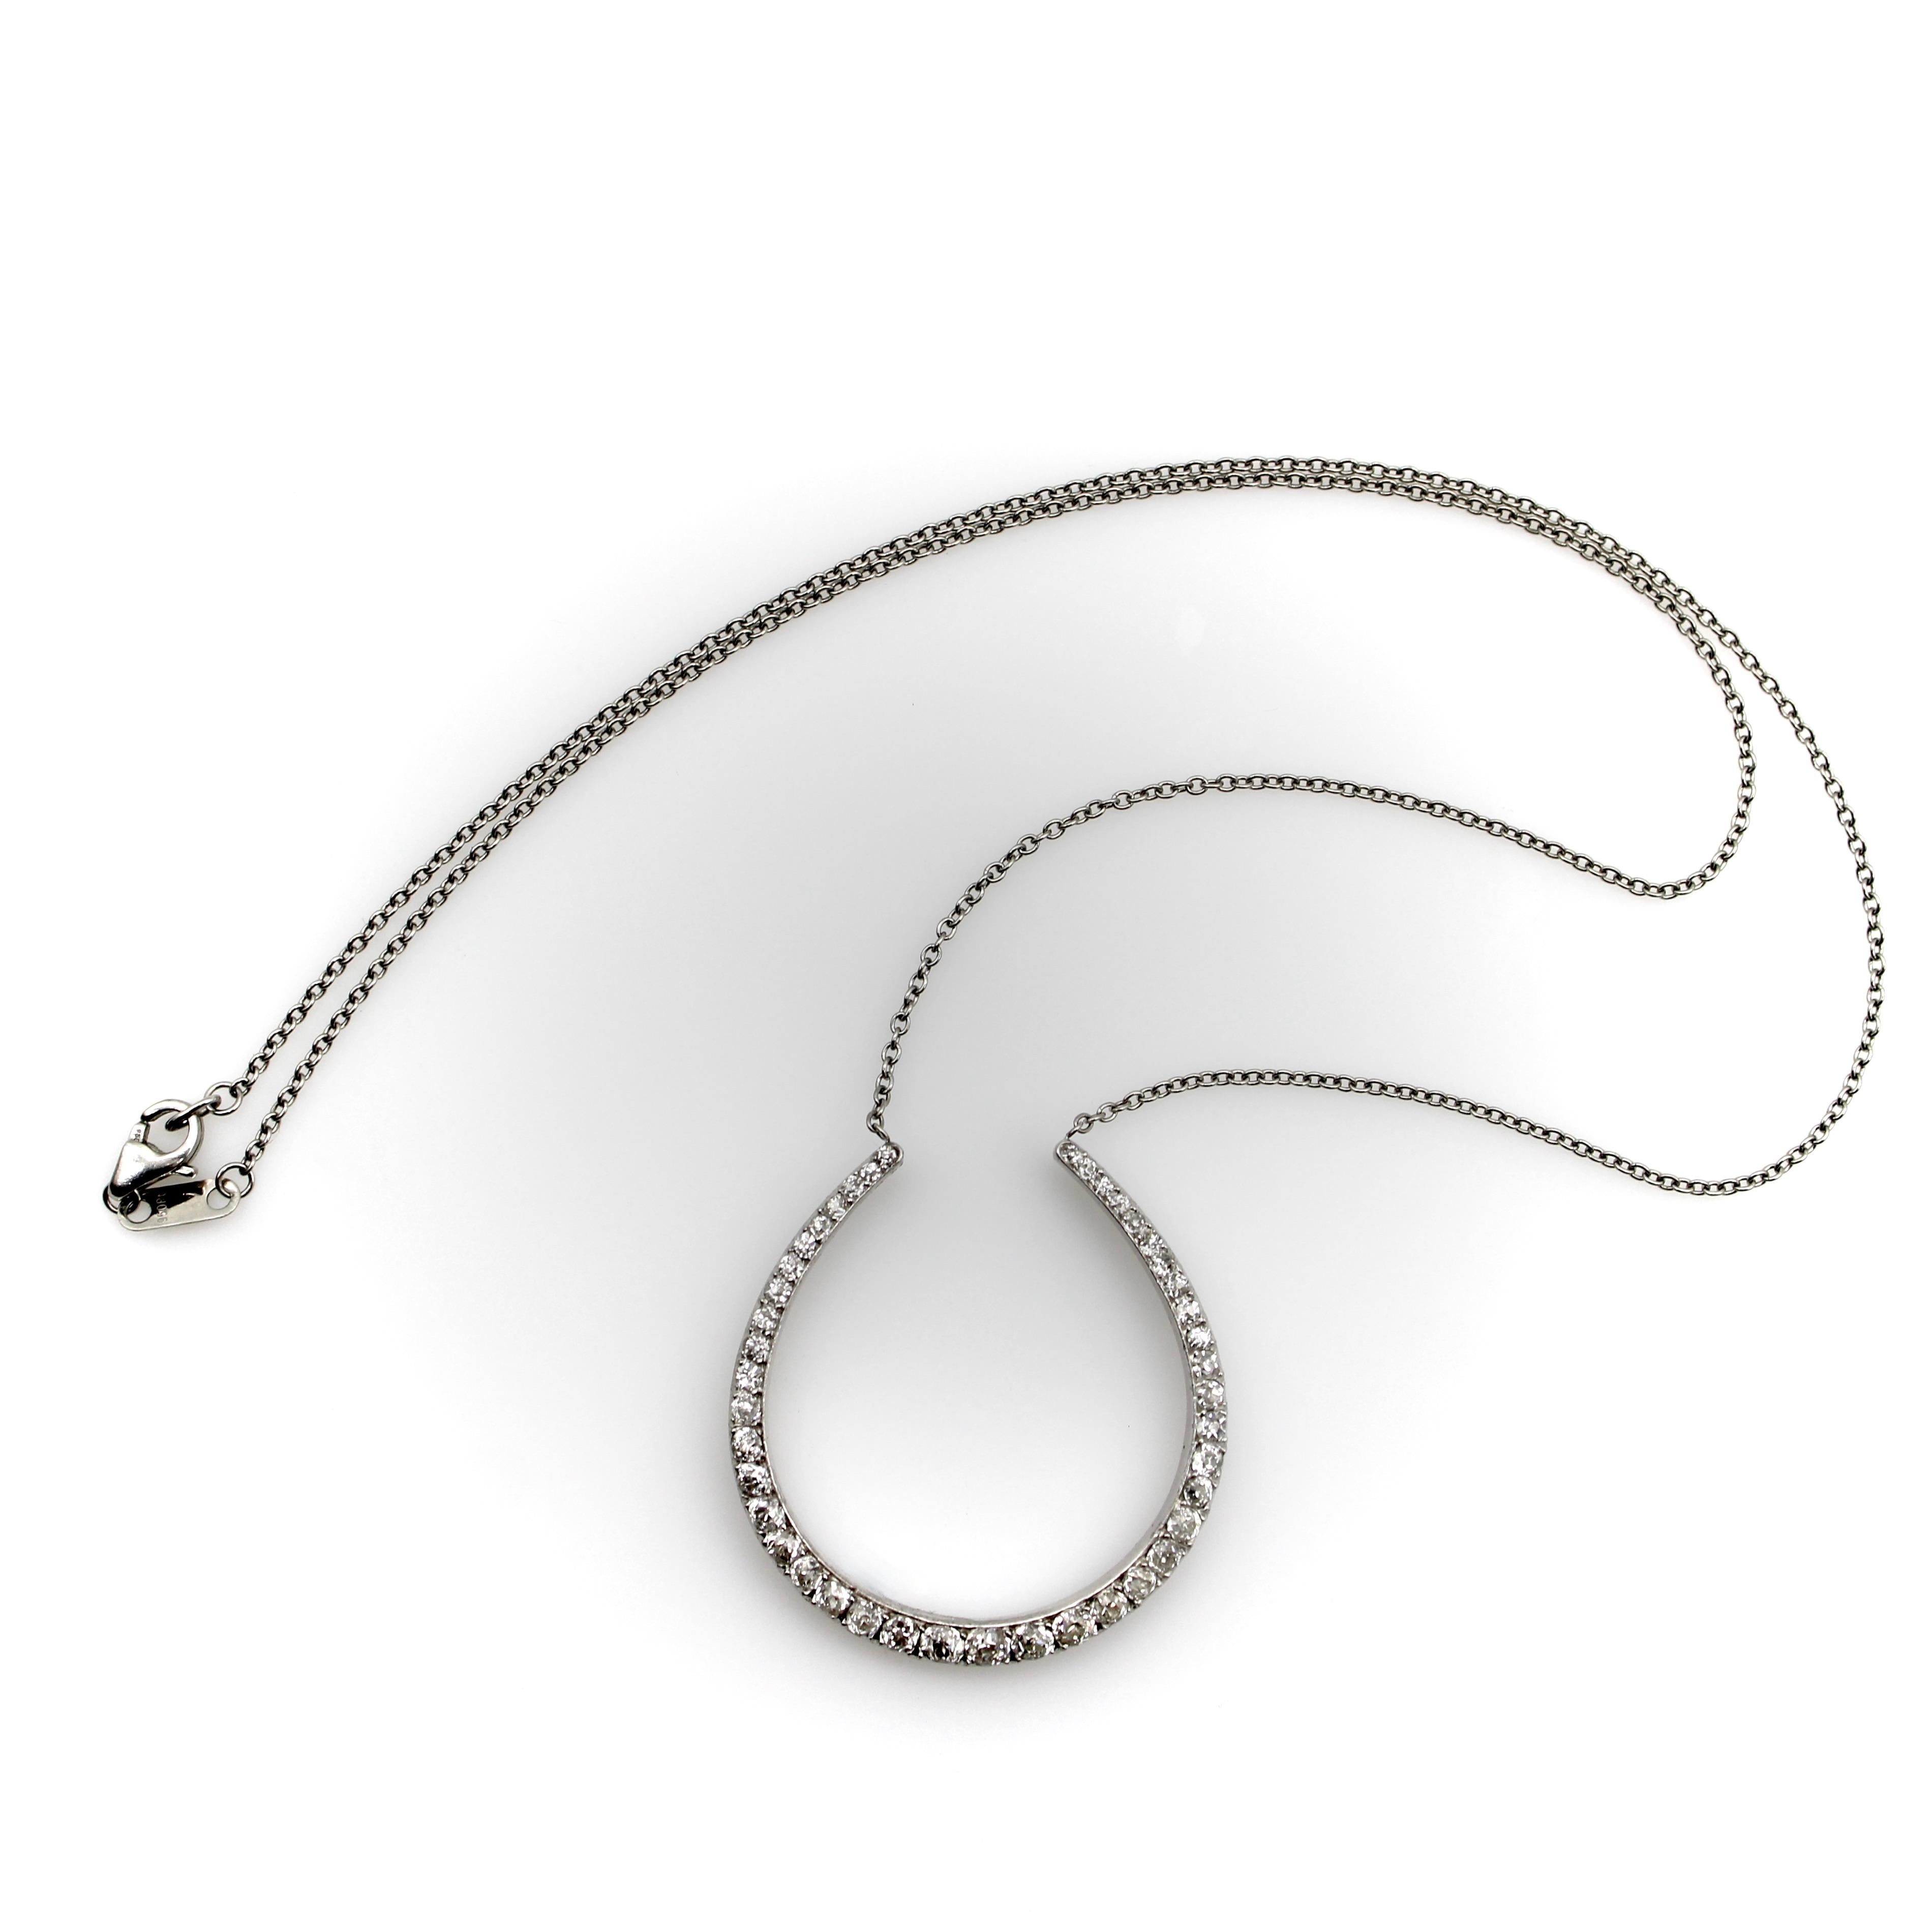 Horseshoes are trending these days in contemporary jewelry! But equestrian motifs have been seen in jewelry since the Edwardian and Victorian eras. Most Edwardian horseshoe pieces were originally brooches, and here, we’ve converted a platinum brooch